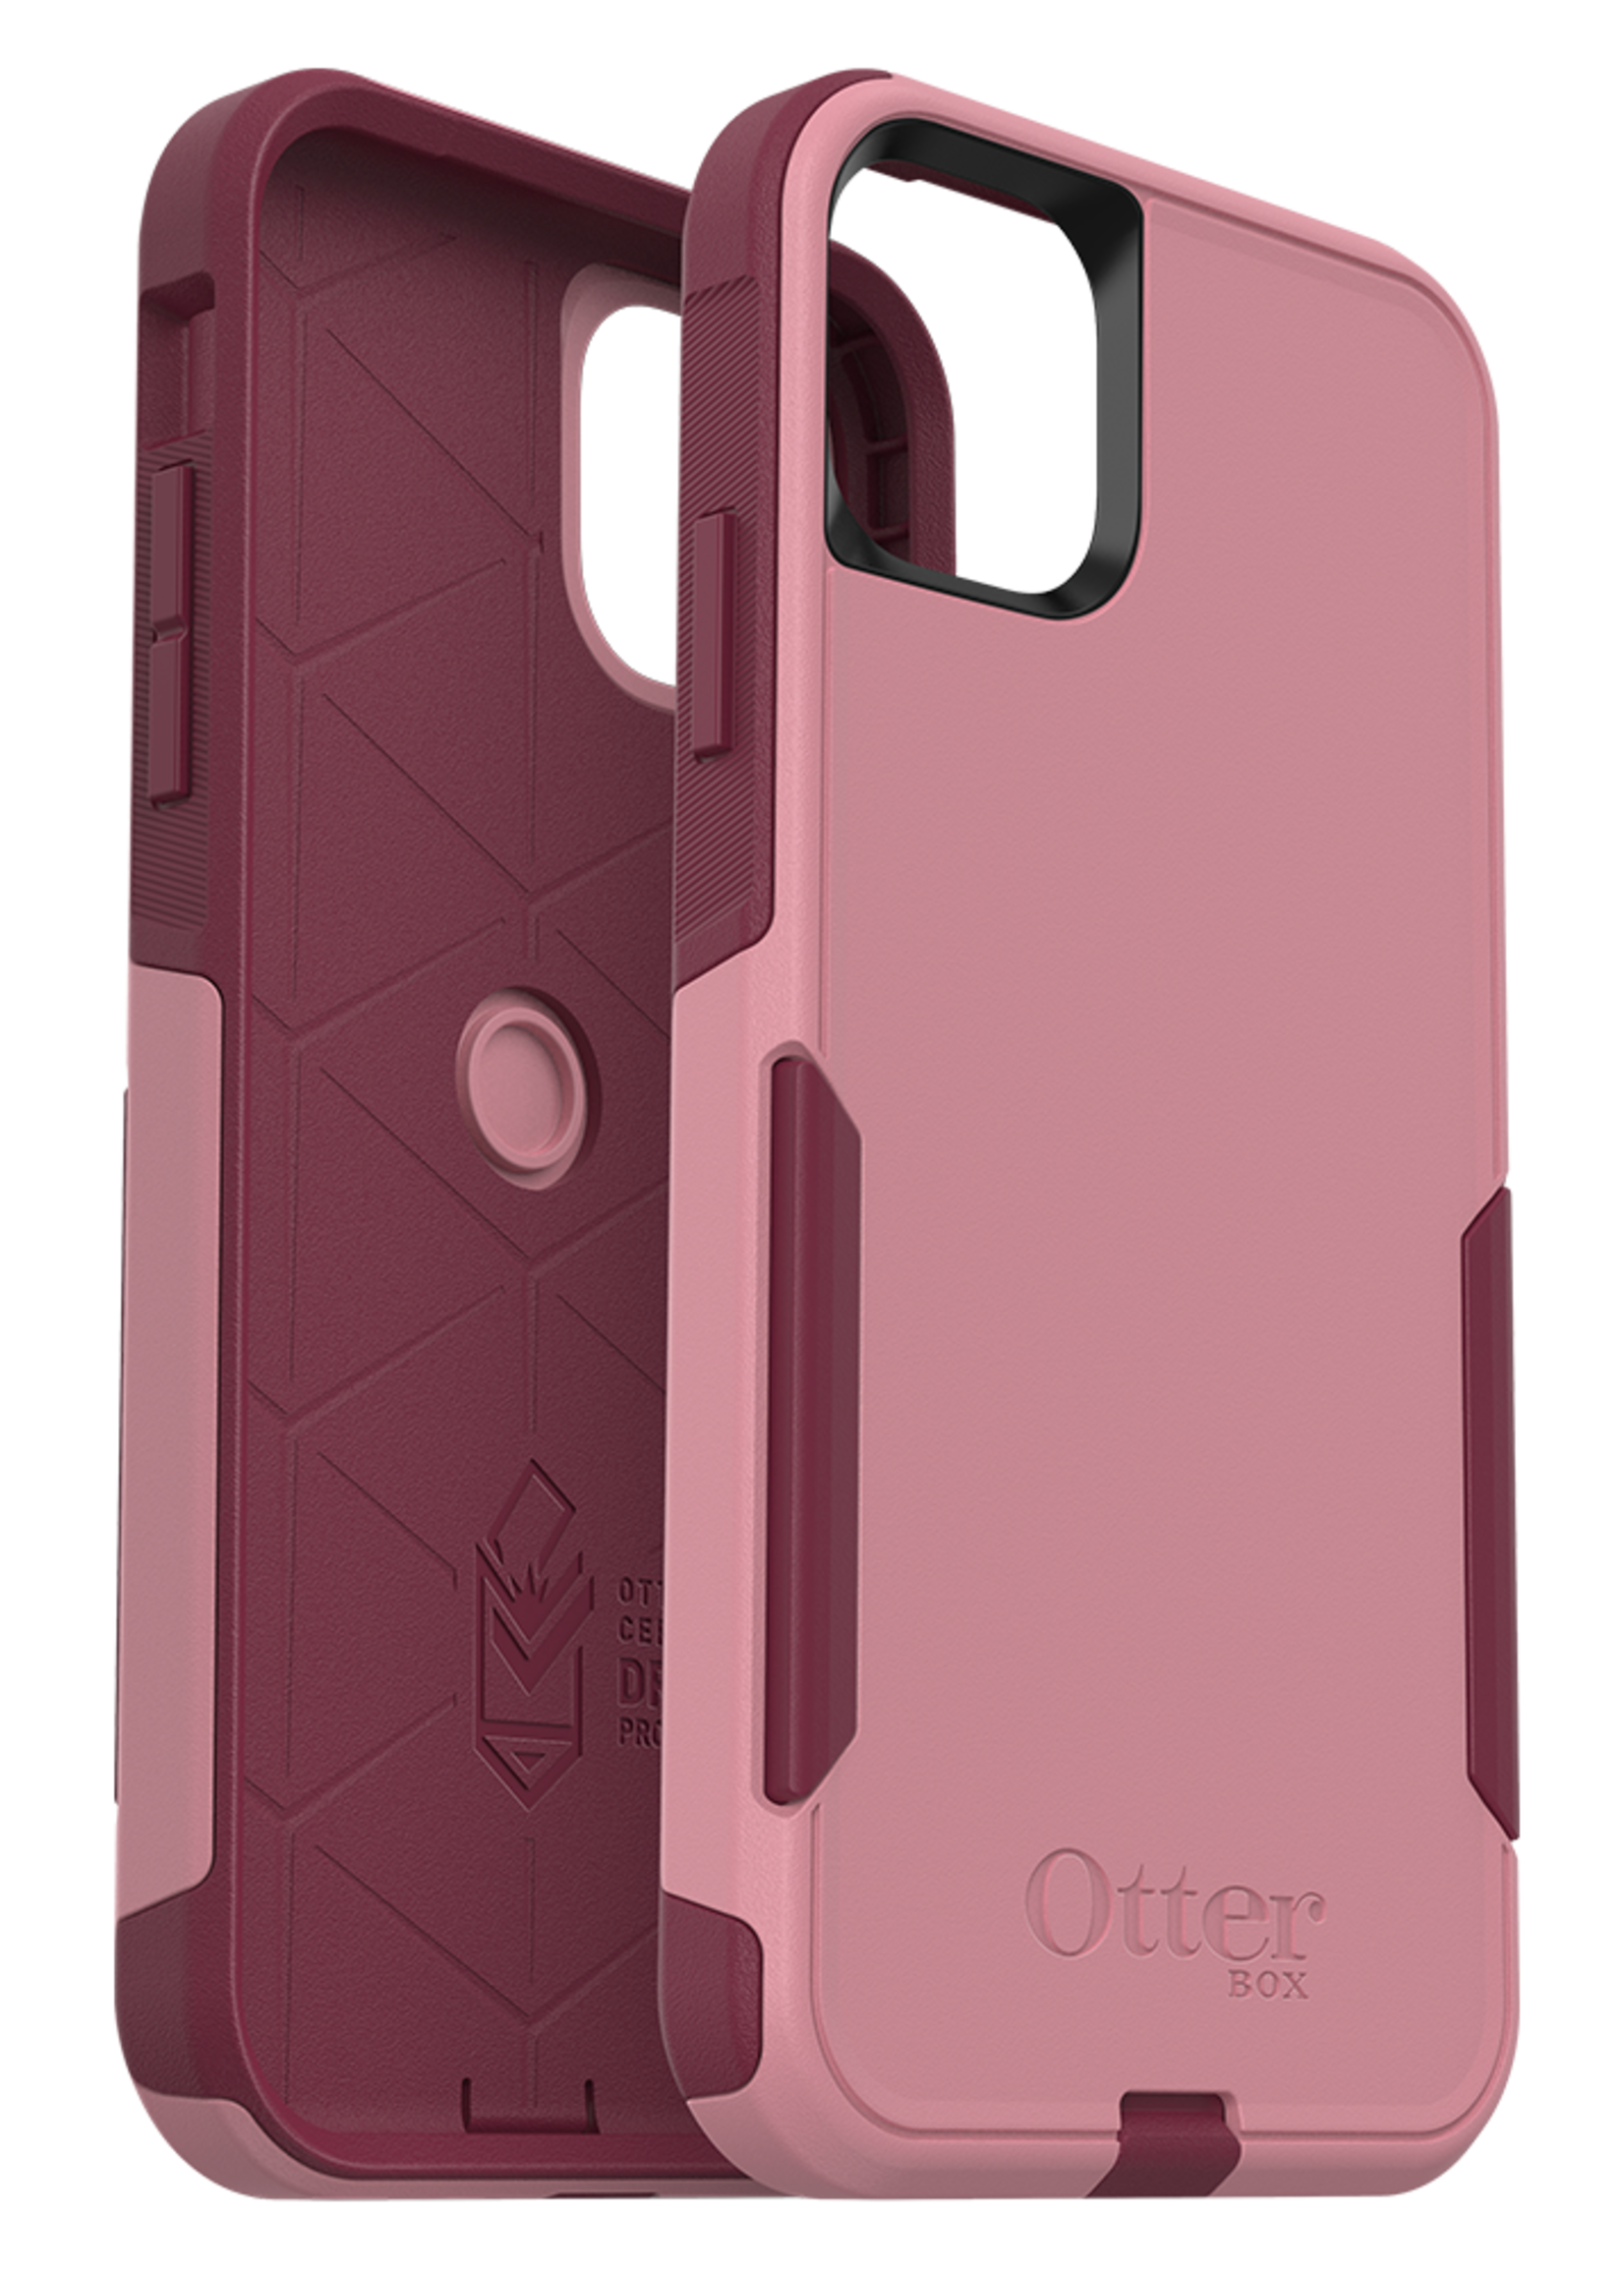 Otterbox OtterBox - Commuter Case for Apple iPhone 11 - Cupids Way